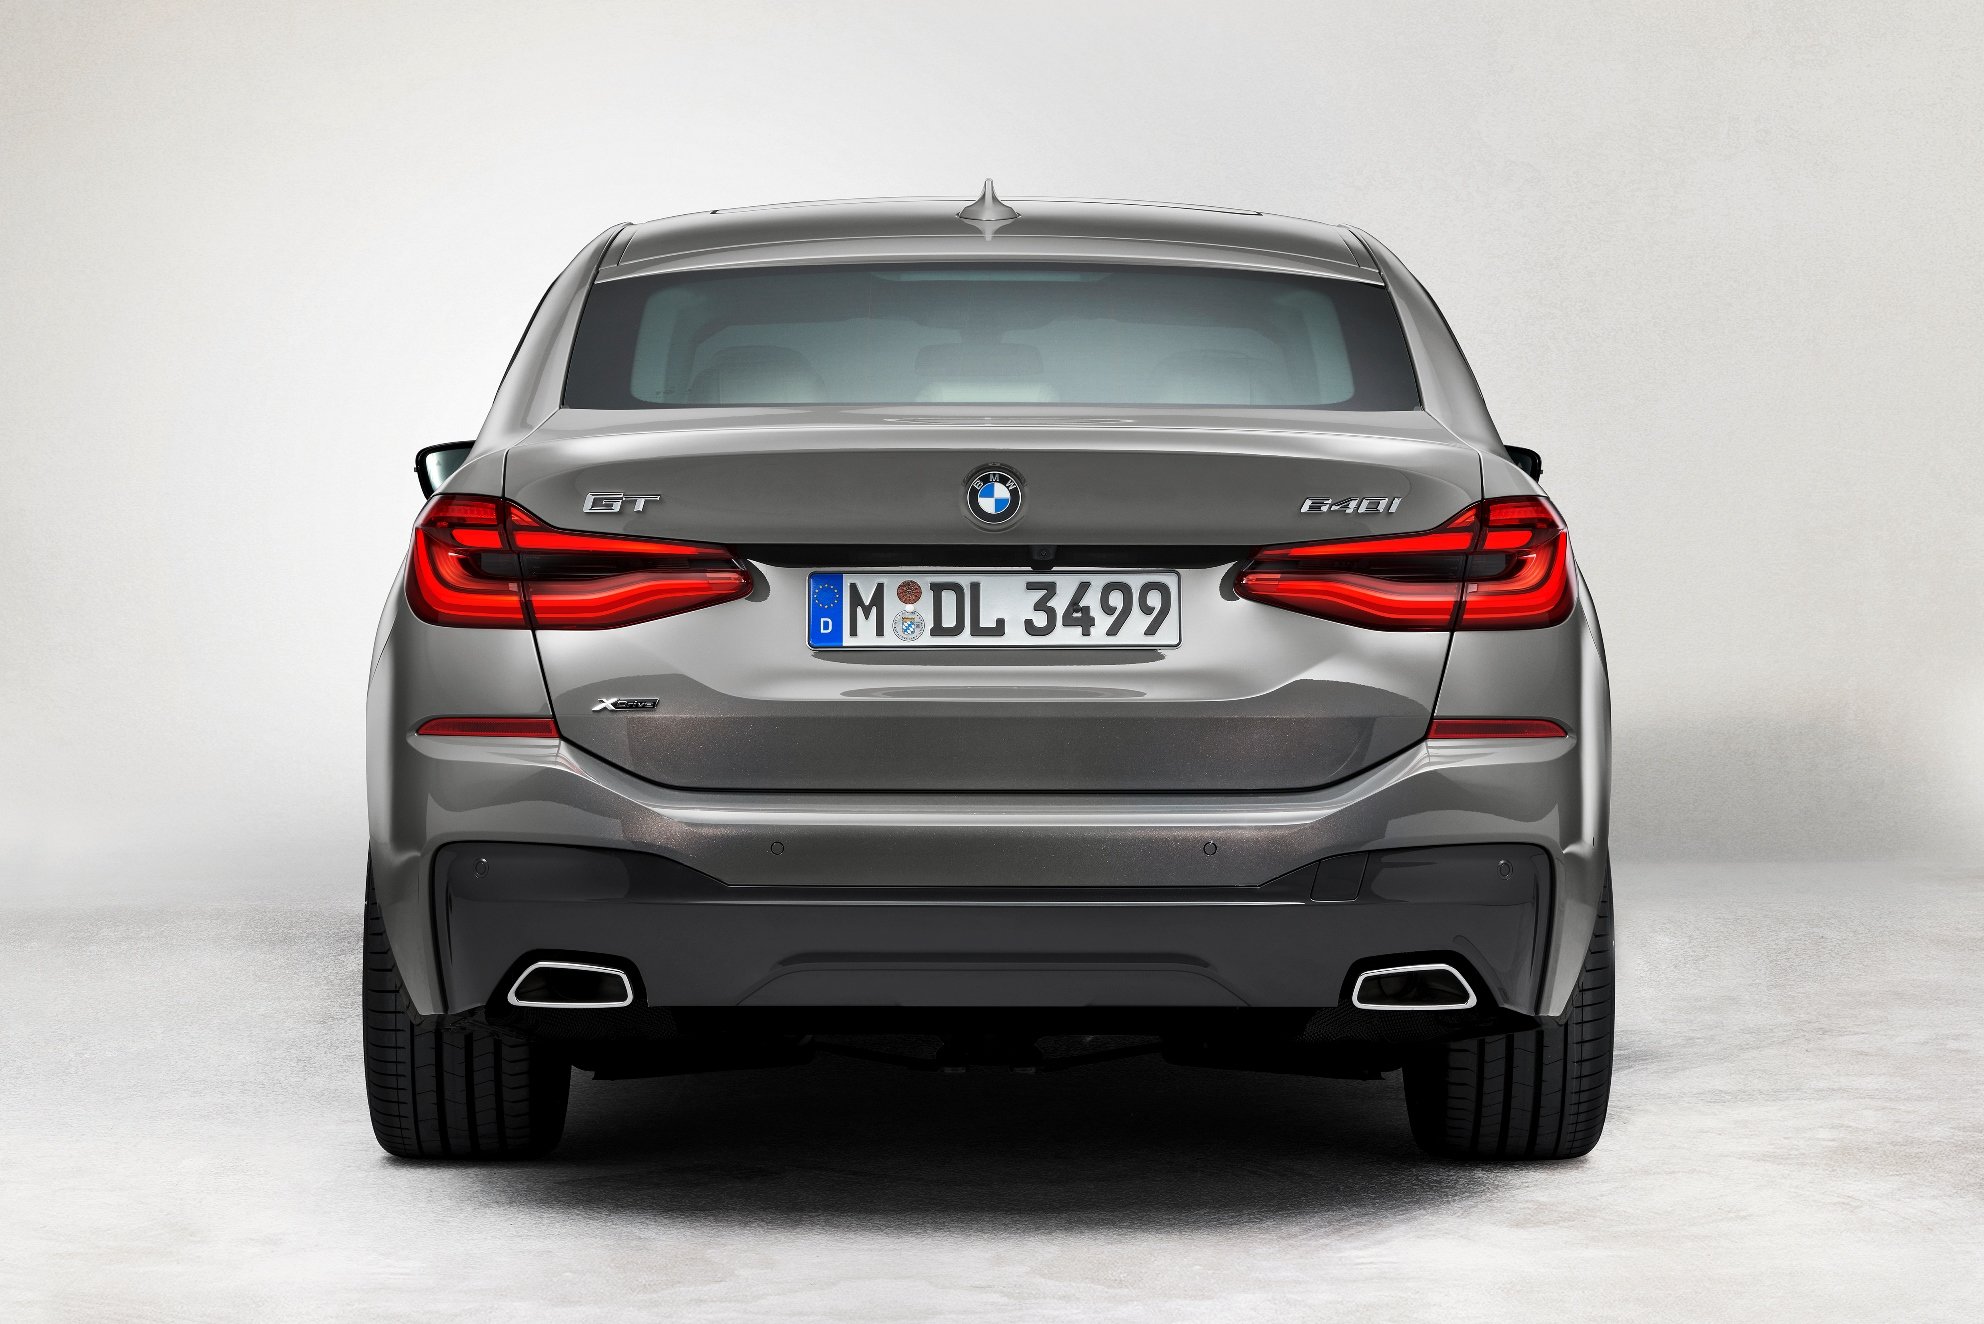 https://autoroad.cz/pictures/photo/2020/05/27/p90389870-highres-the-new-bmw-640i-xdr-b35e509274.jpg